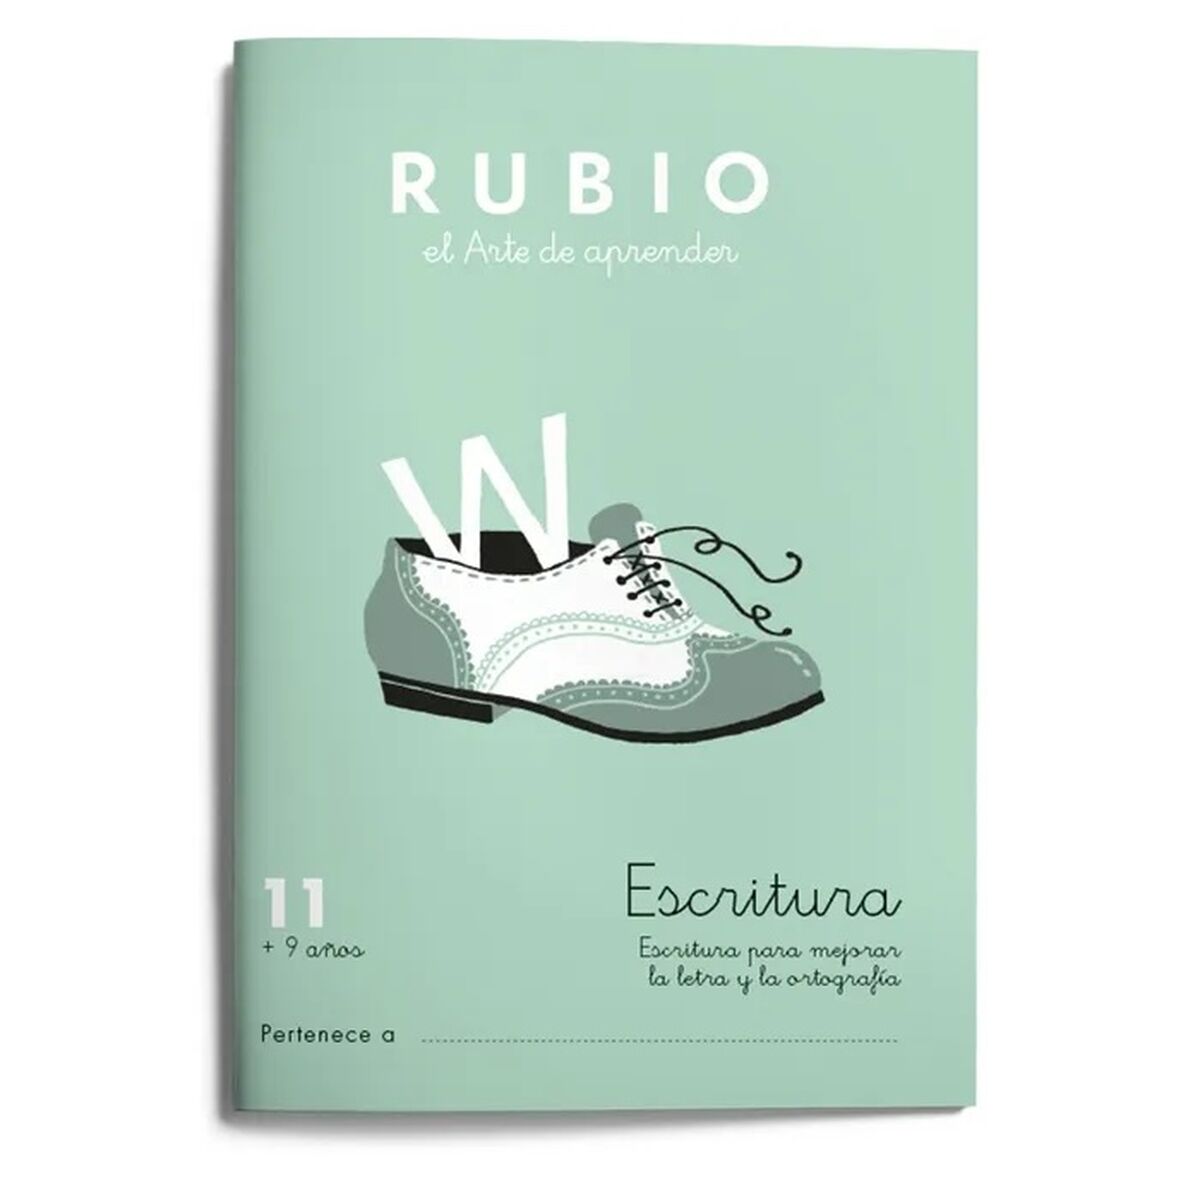 Writing and calligraphy notebook Rubio Nº11 A5 Spanish 20 Sheets (10 Units)